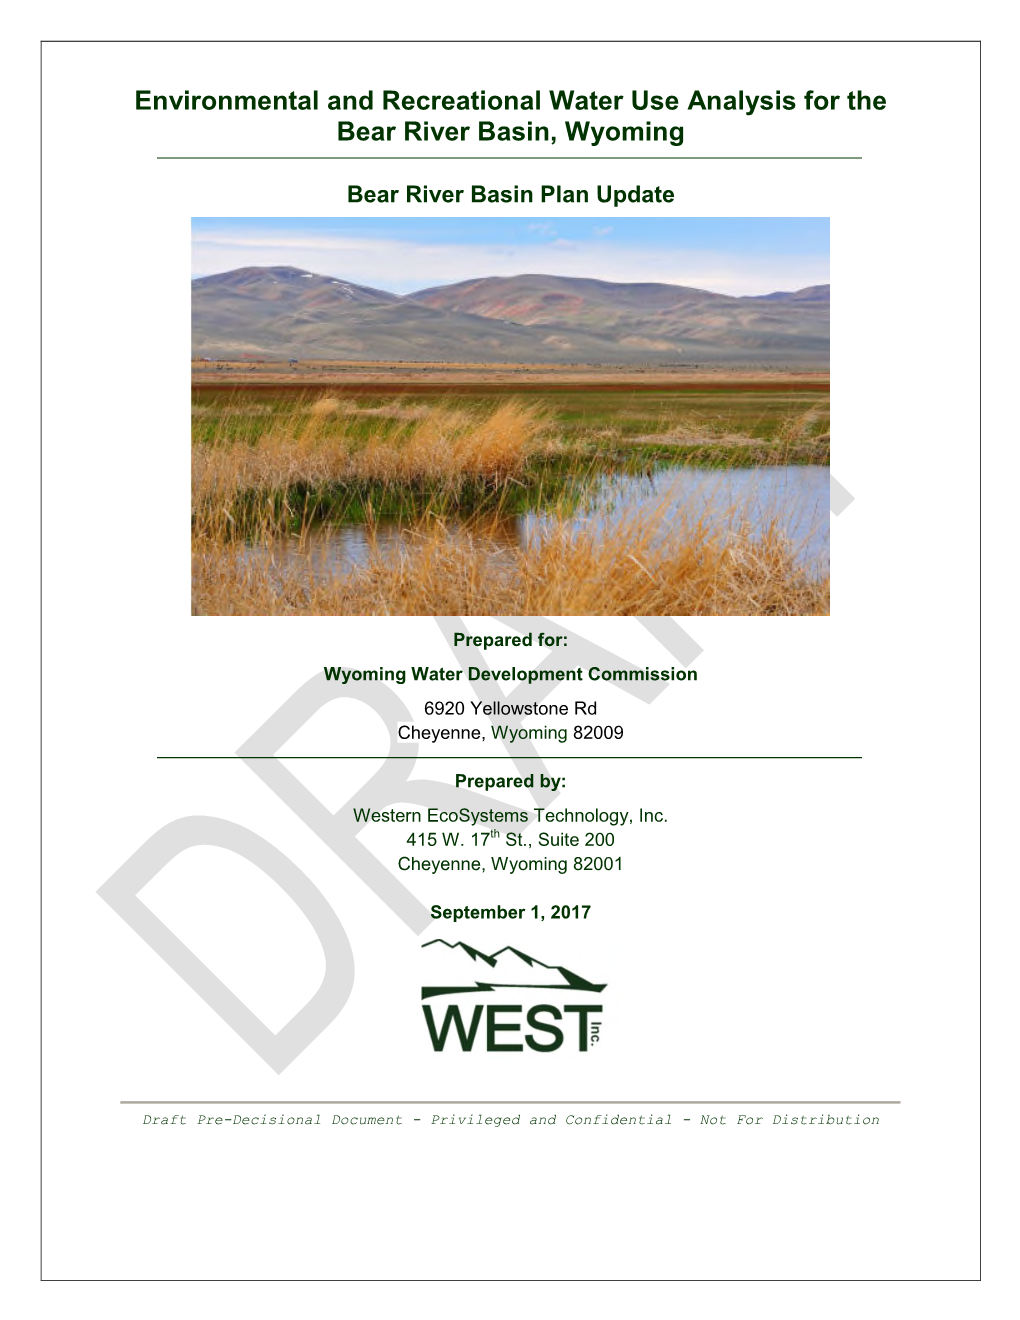 Environmental and Recreational Water Use Analysis for the Bear River Basin, Wyoming